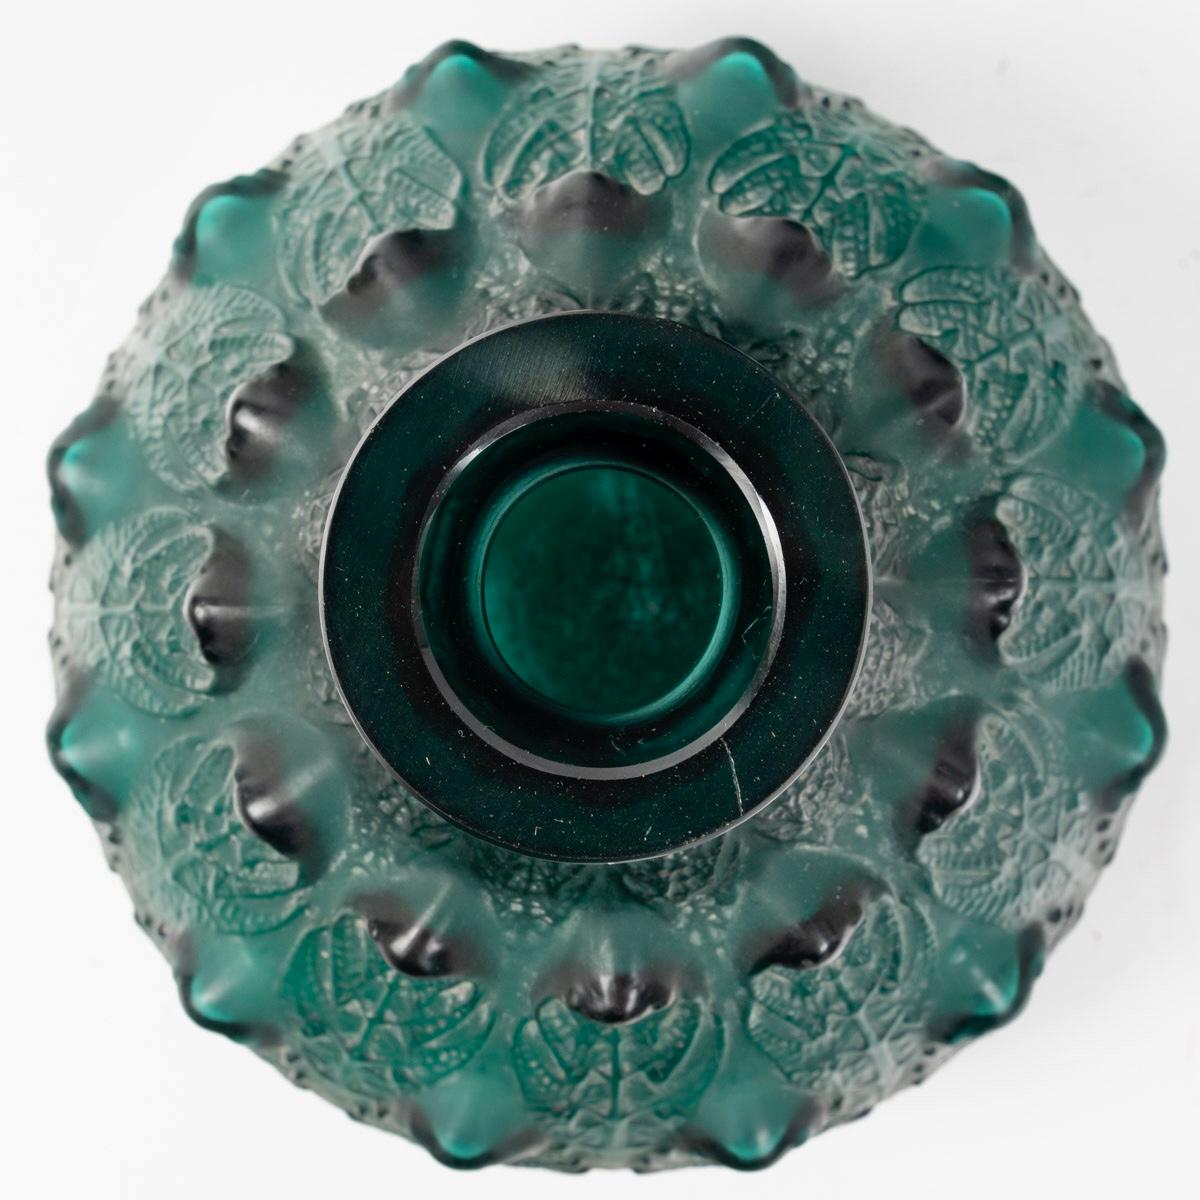 Molded 1912 René Lalique Vase Fougeres Teal Green Glass with White Patina Ferns